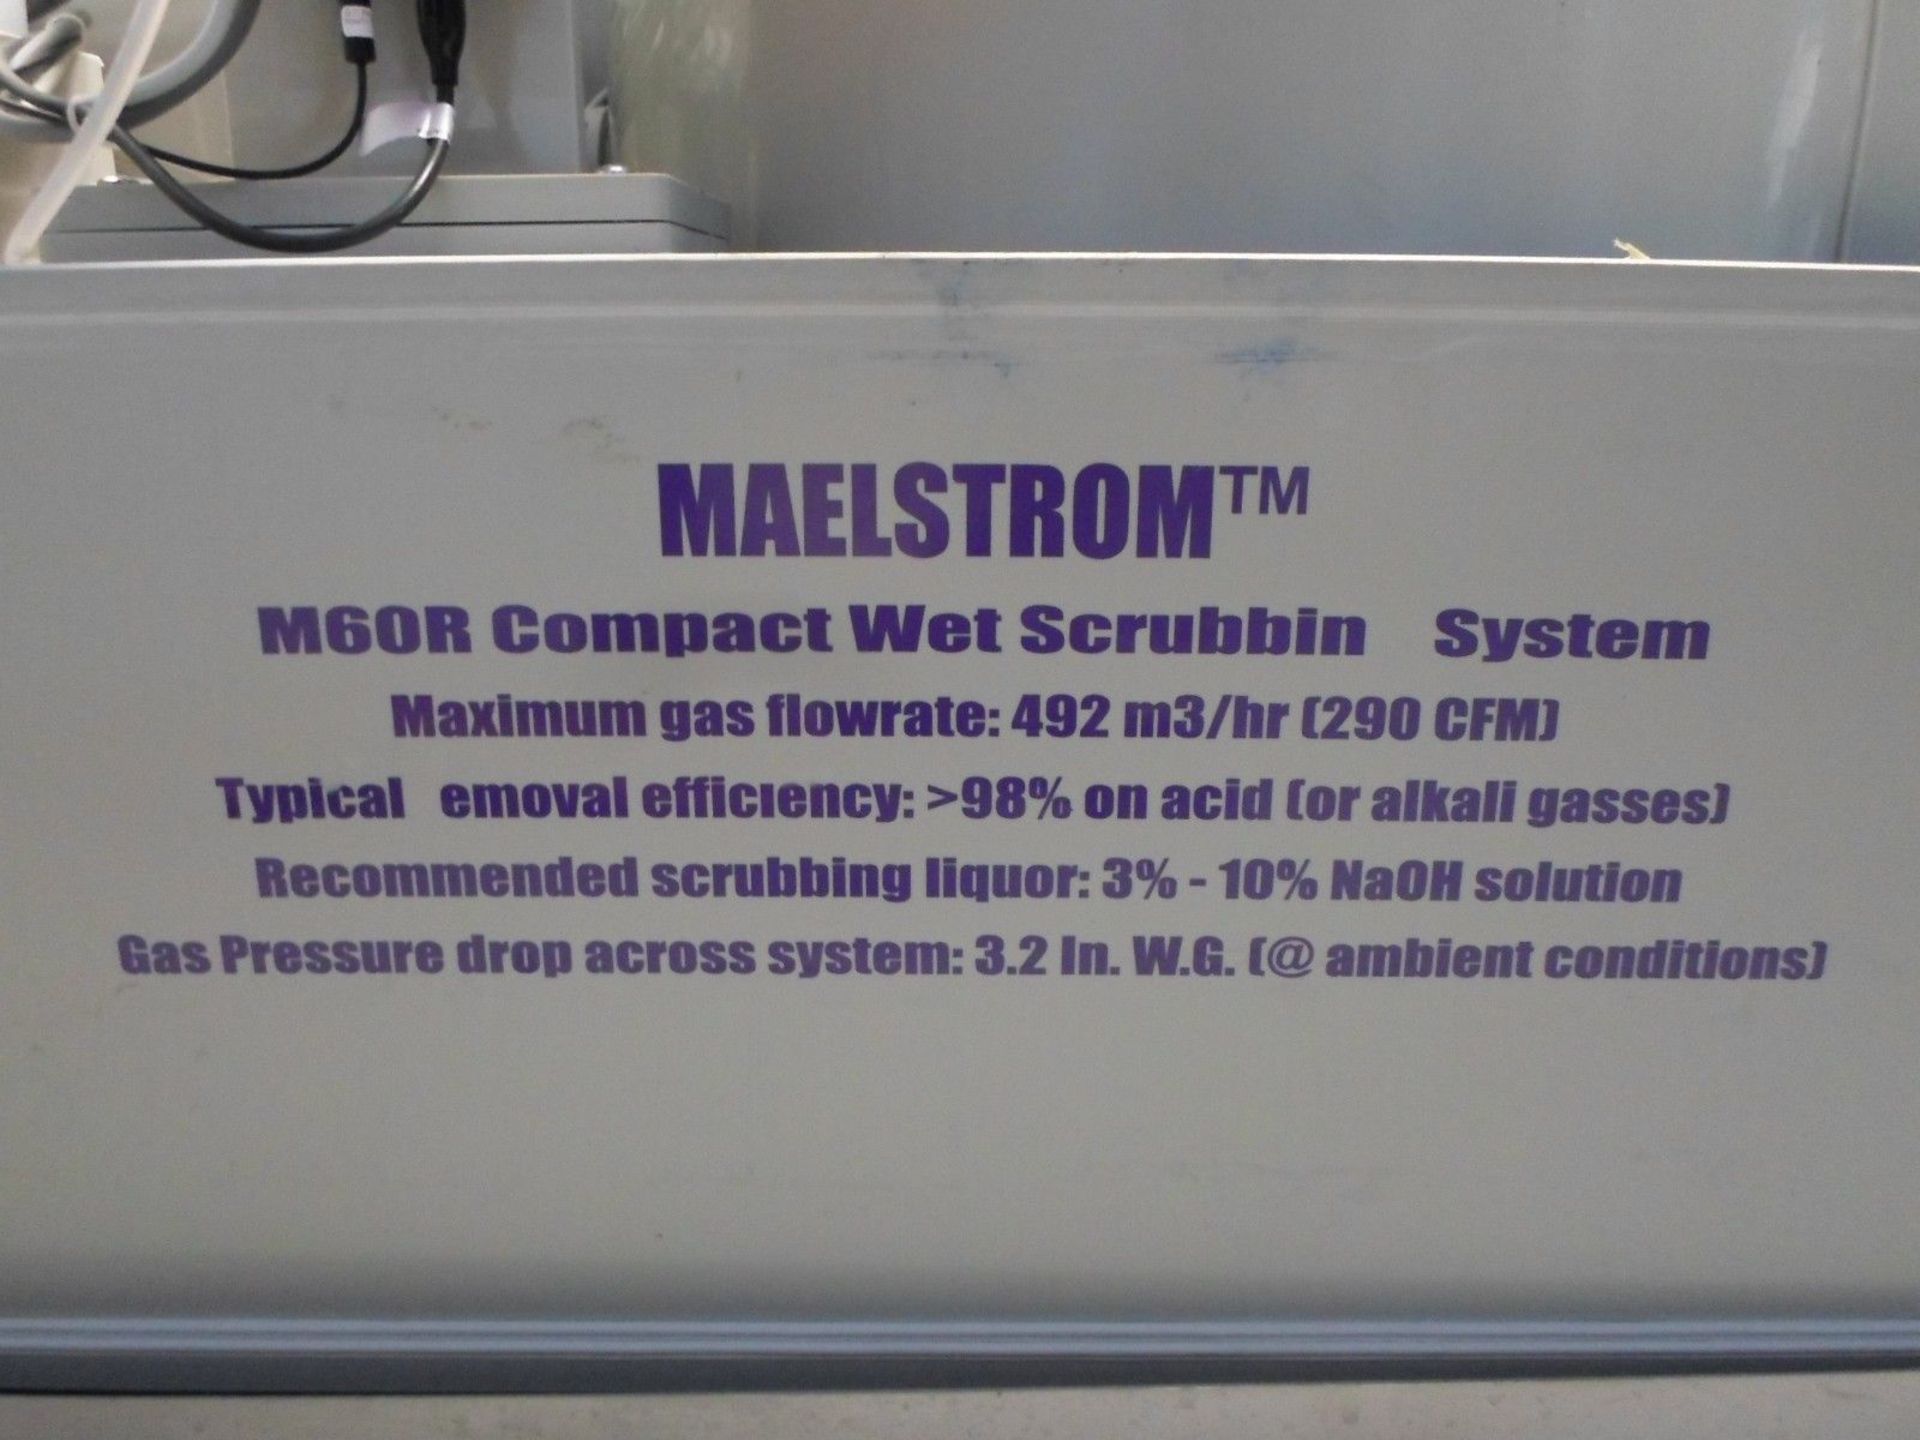 MAELSTROM M60R COMPACT WET SCRUBBING SYSTEM 290CFM (Wet Scrubber) Max Gas Florate 492 m3/hr - Image 5 of 5